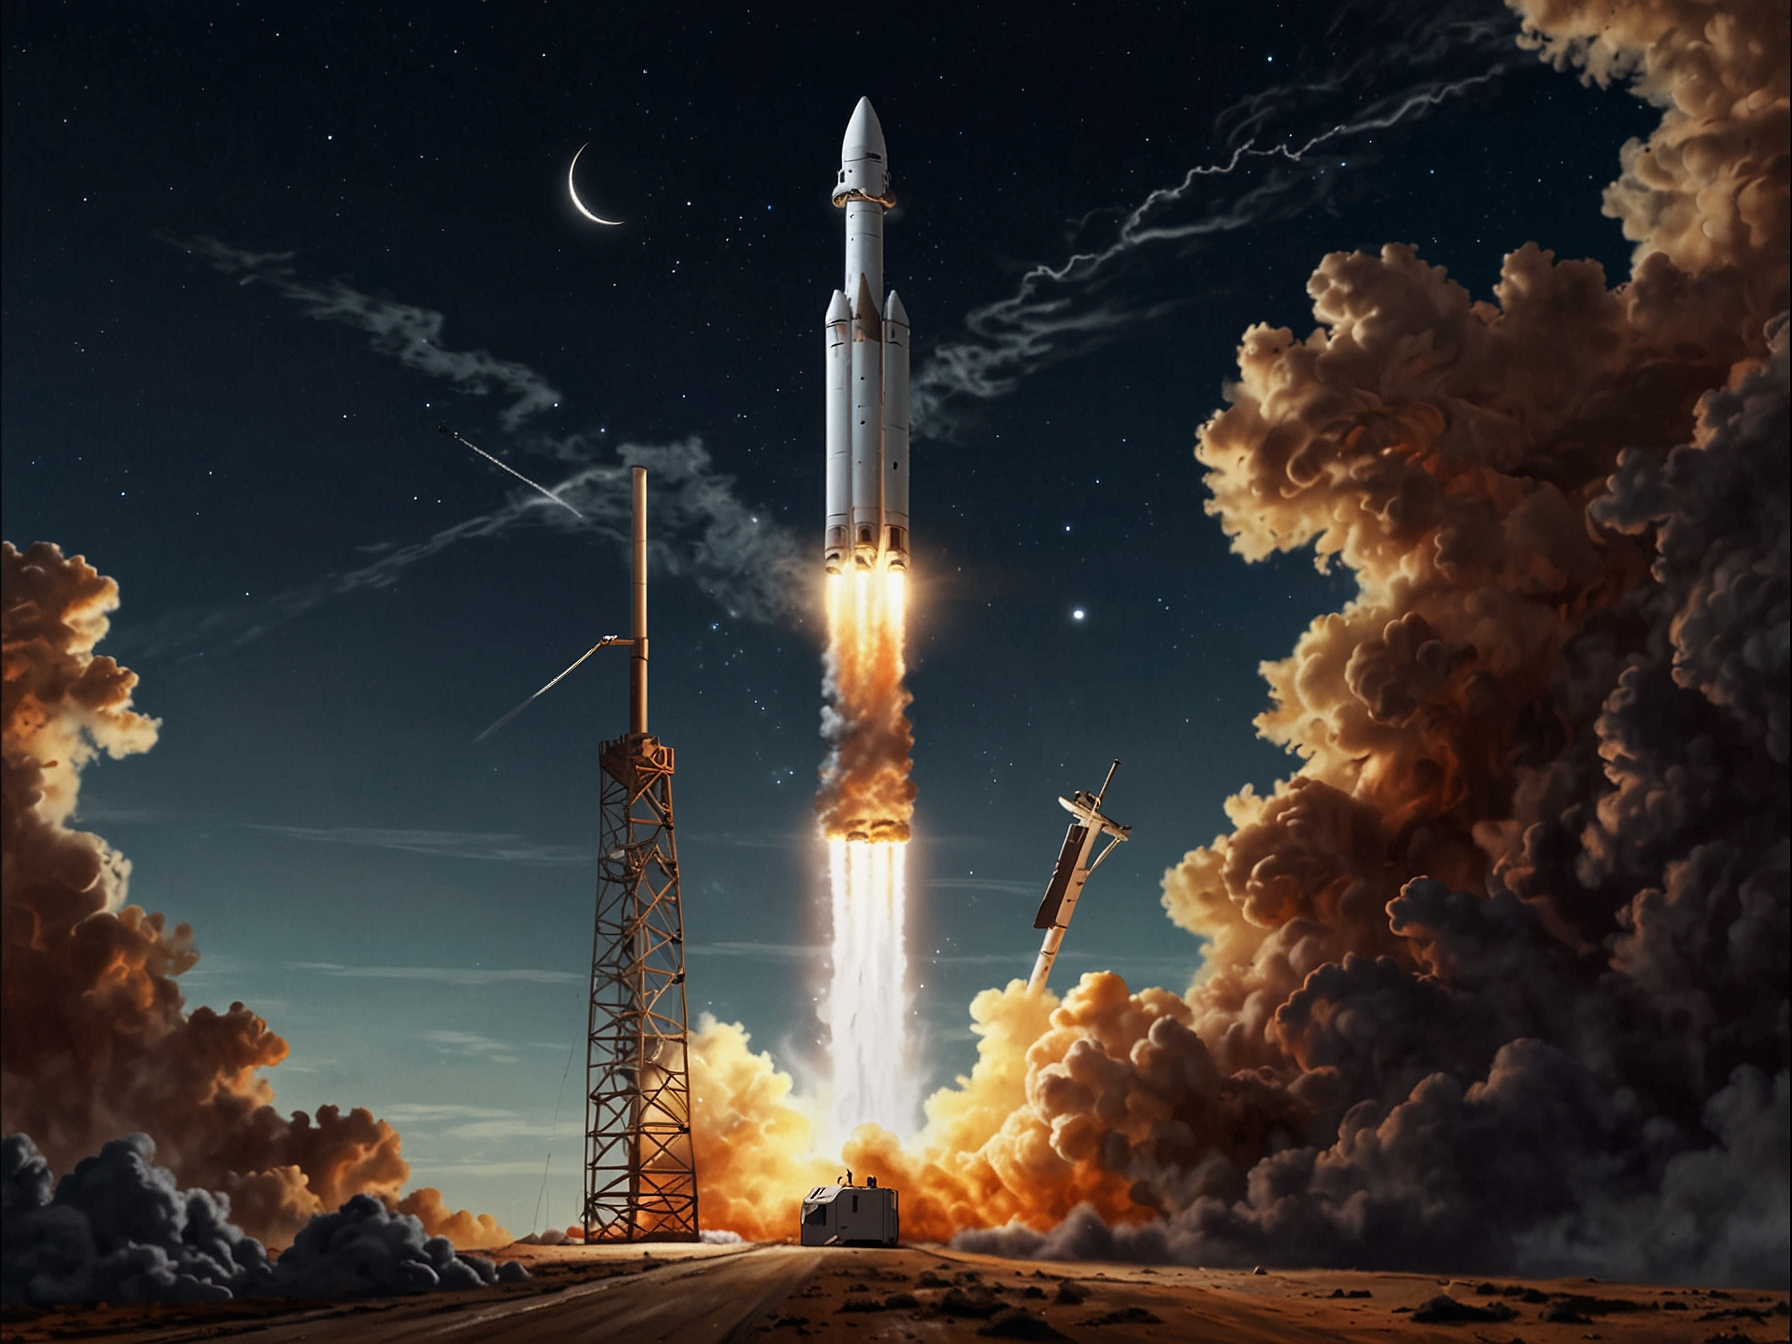 A SpaceX Falcon rocket launching from the Earth's surface, symbolizing the trusted partnership between NASA and SpaceX in deorbiting the ISS and future space missions.